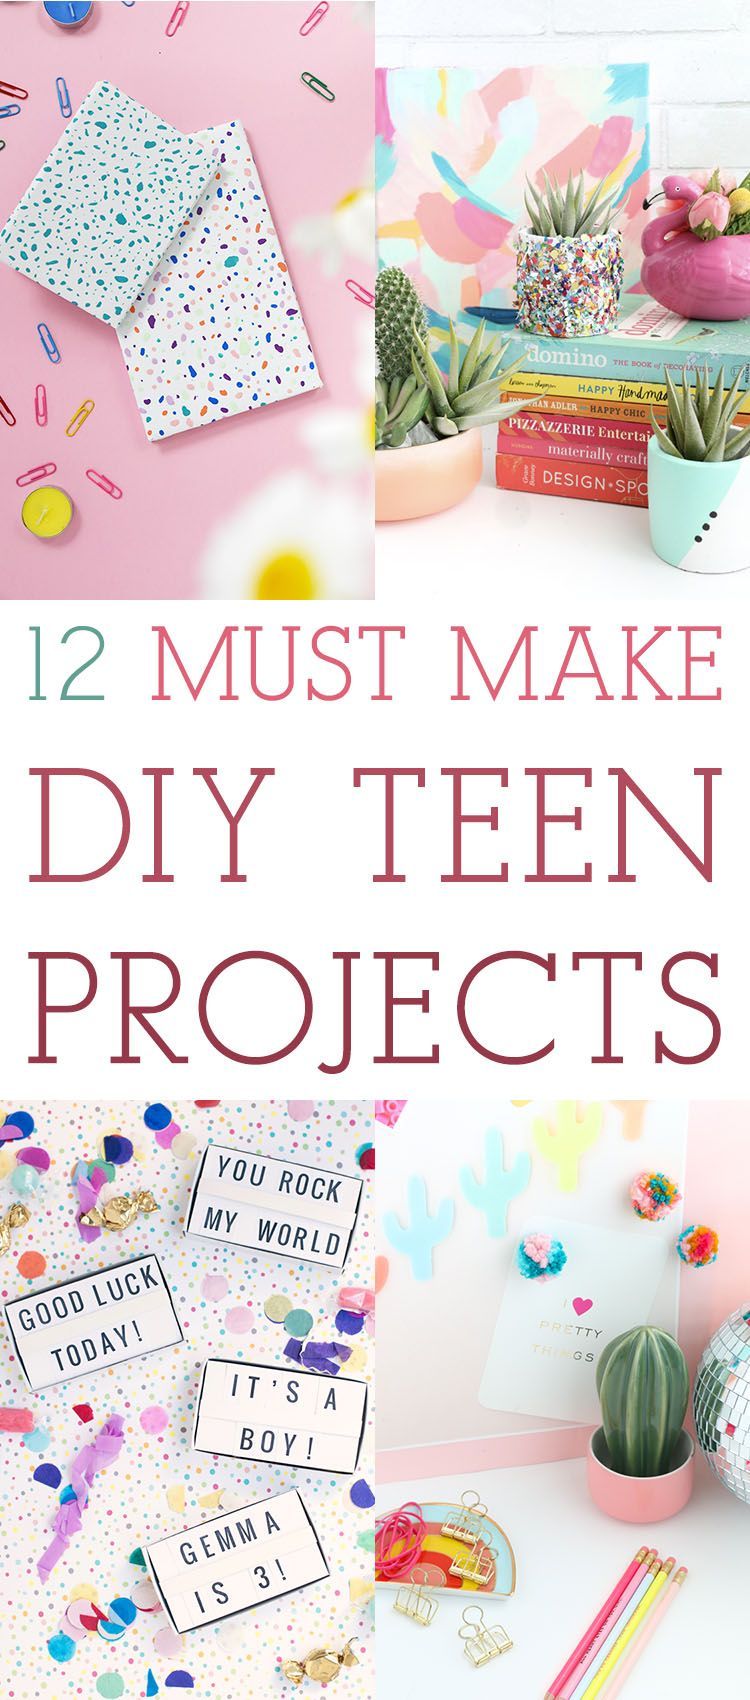 12 Must Make DIY Teen Projects! // Great for Gifts - The Cottage Market - 12 Must Make DIY Teen Projects! // Great for Gifts - The Cottage Market -   19 diy For Teens at home ideas